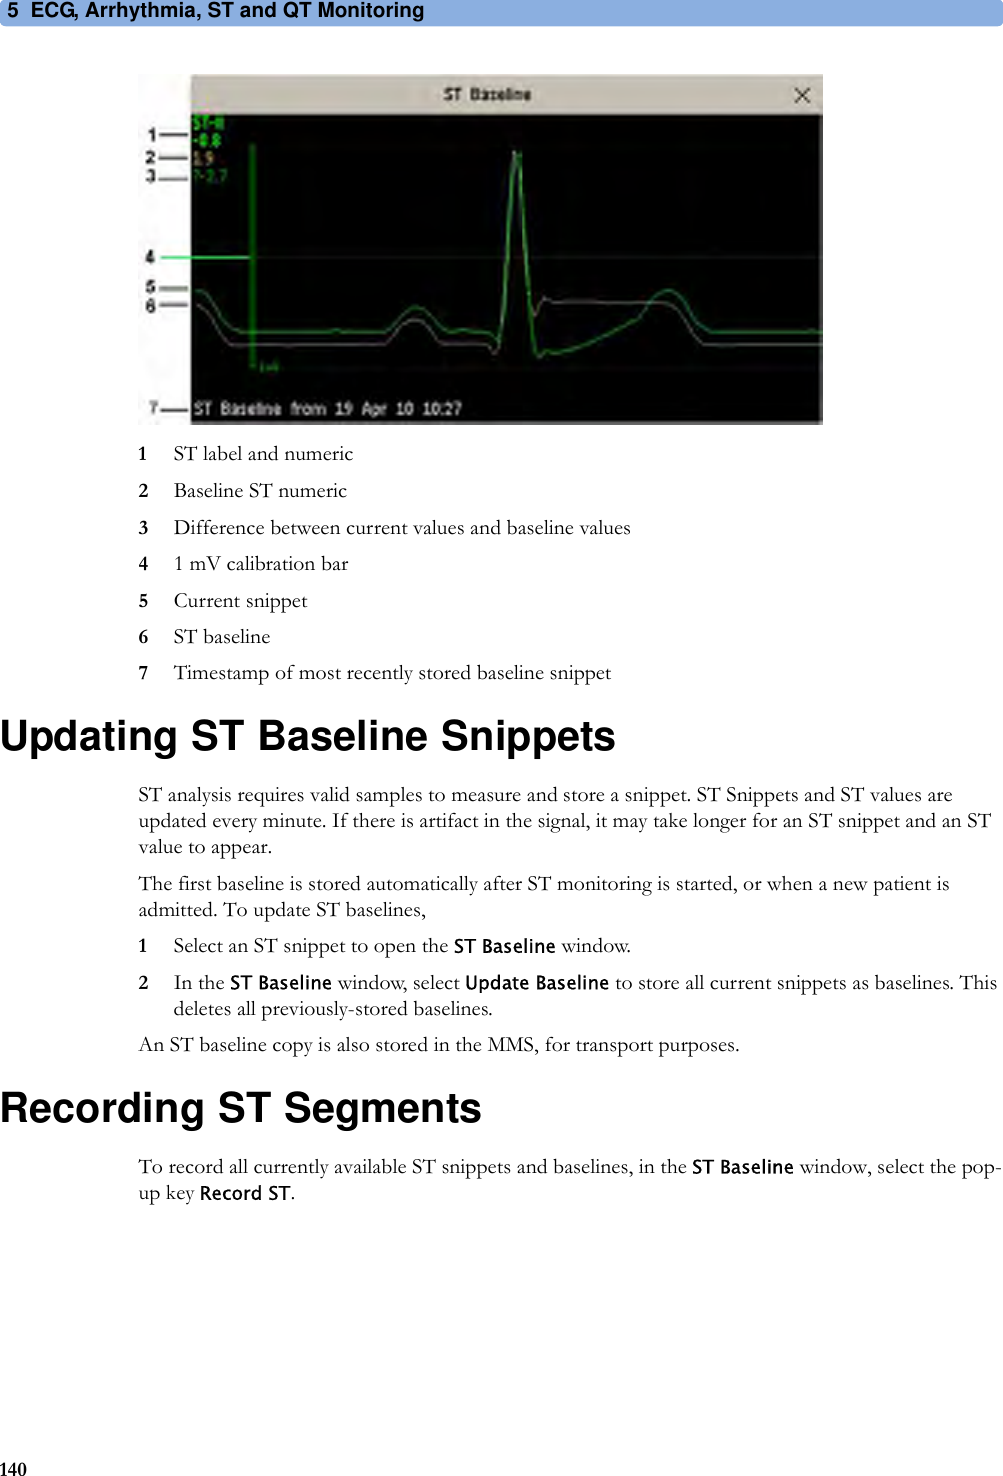 5 ECG, Arrhythmia, ST and QT Monitoring1401ST label and numeric2Baseline ST numeric3Difference between current values and baseline values41 mV calibration bar5Current snippet6ST baseline7Timestamp of most recently stored baseline snippetUpdating ST Baseline SnippetsST analysis requires valid samples to measure and store a snippet. ST Snippets and ST values are updated every minute. If there is artifact in the signal, it may take longer for an ST snippet and an ST value to appear.The first baseline is stored automatically after ST monitoring is started, or when a new patient is admitted. To update ST baselines,1Select an ST snippet to open the ST Baseline window.2In the ST Baseline window, select Update Baseline to store all current snippets as baselines. This deletes all previously-stored baselines.An ST baseline copy is also stored in the MMS, for transport purposes.Recording ST SegmentsTo record all currently available ST snippets and baselines, in the ST Baseline window, select the pop-up key Record ST.